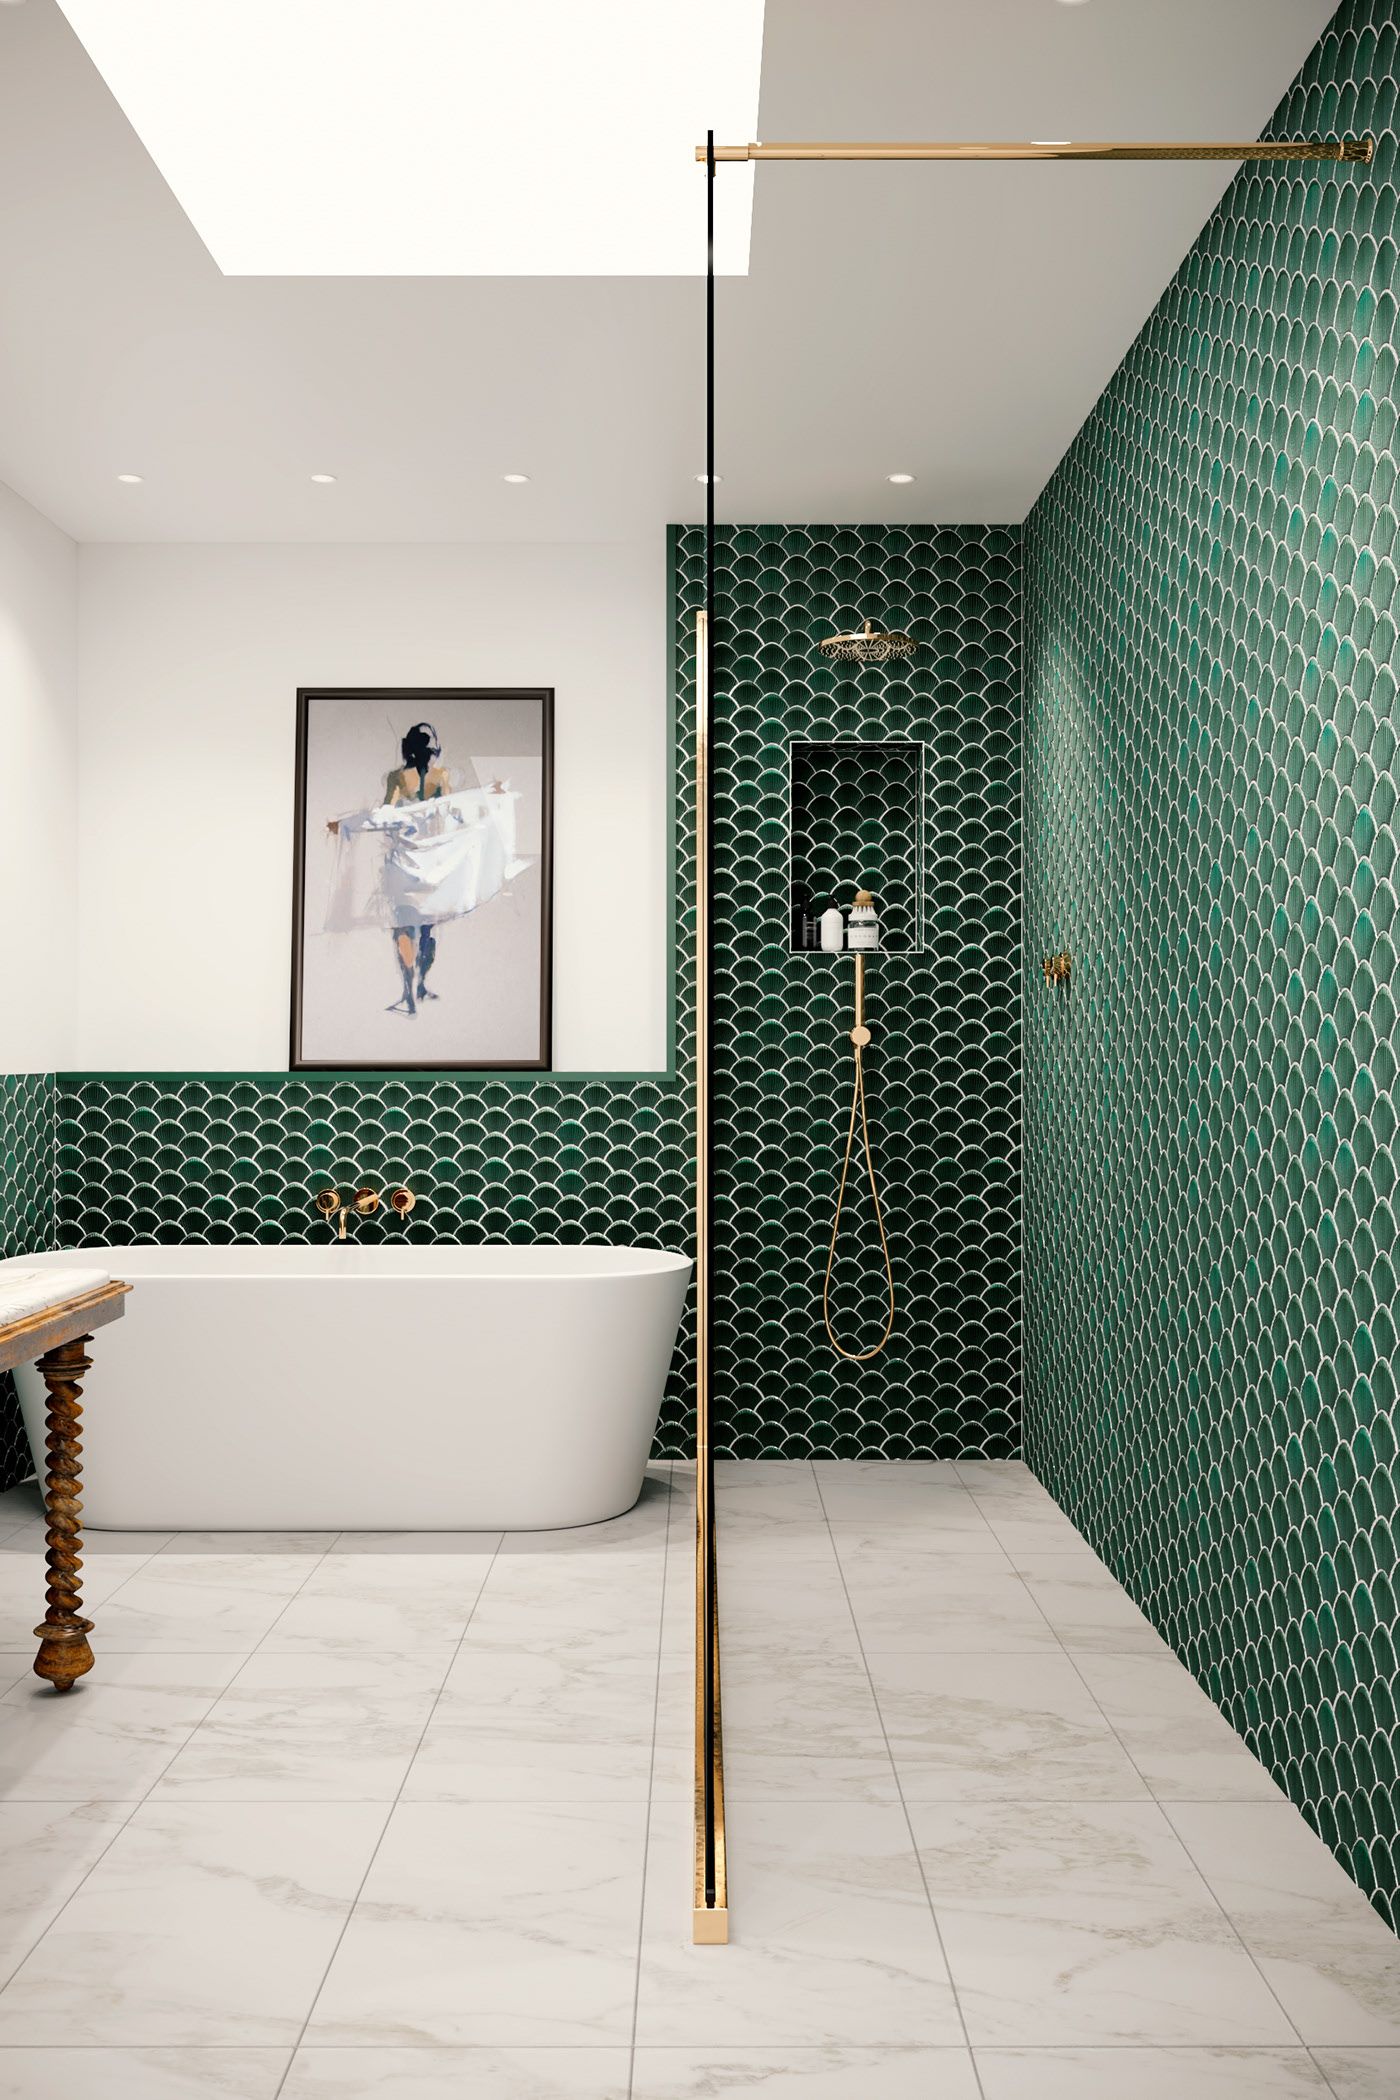 Fish Fin Tiles for A Striking Accent on the Wall